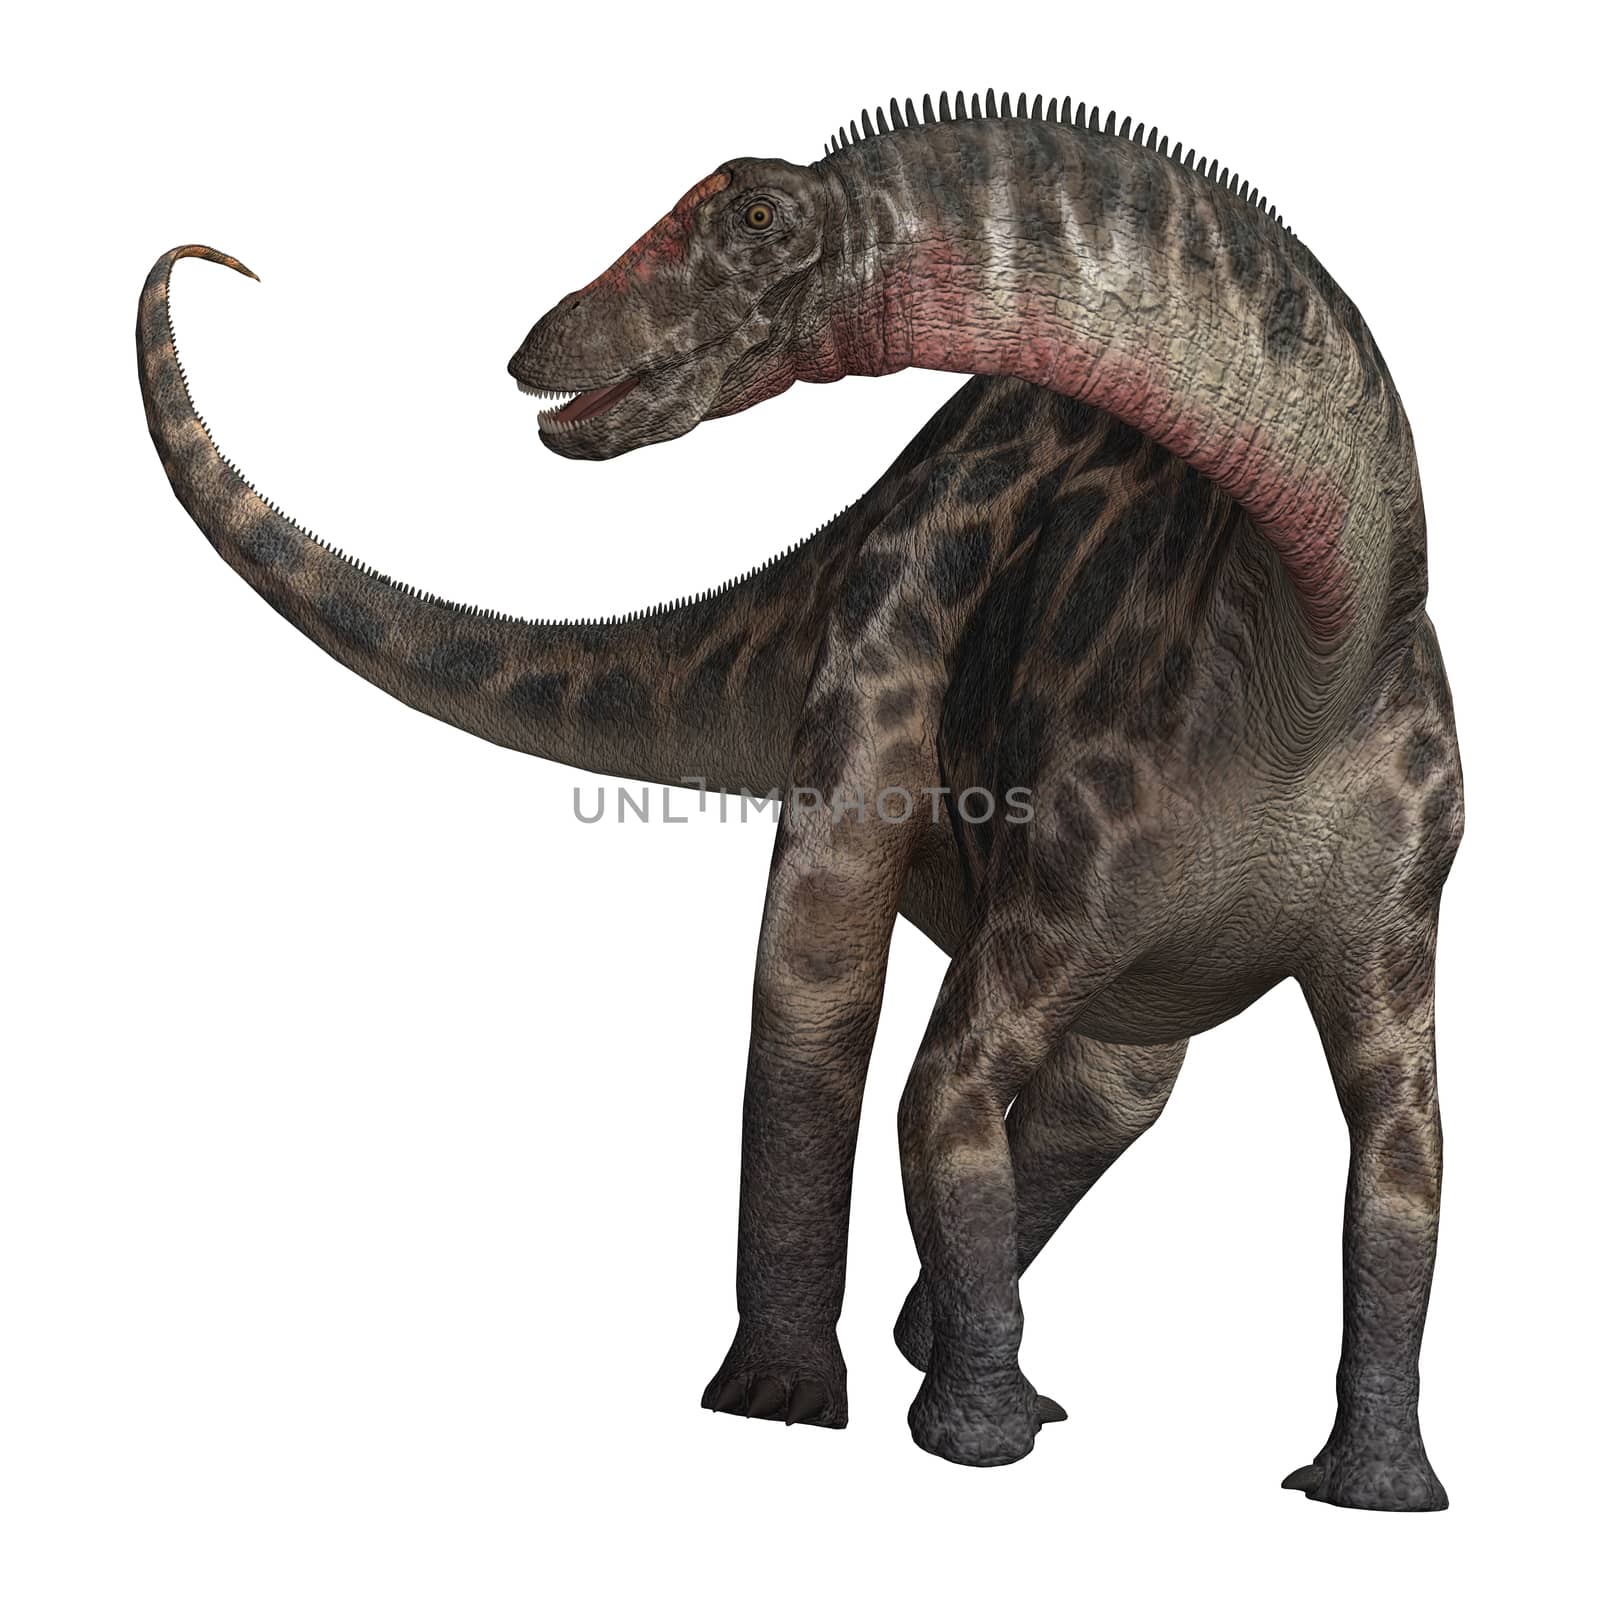 3D digital render of  a curious dinosaur Dicraeosaurus isolated on white background